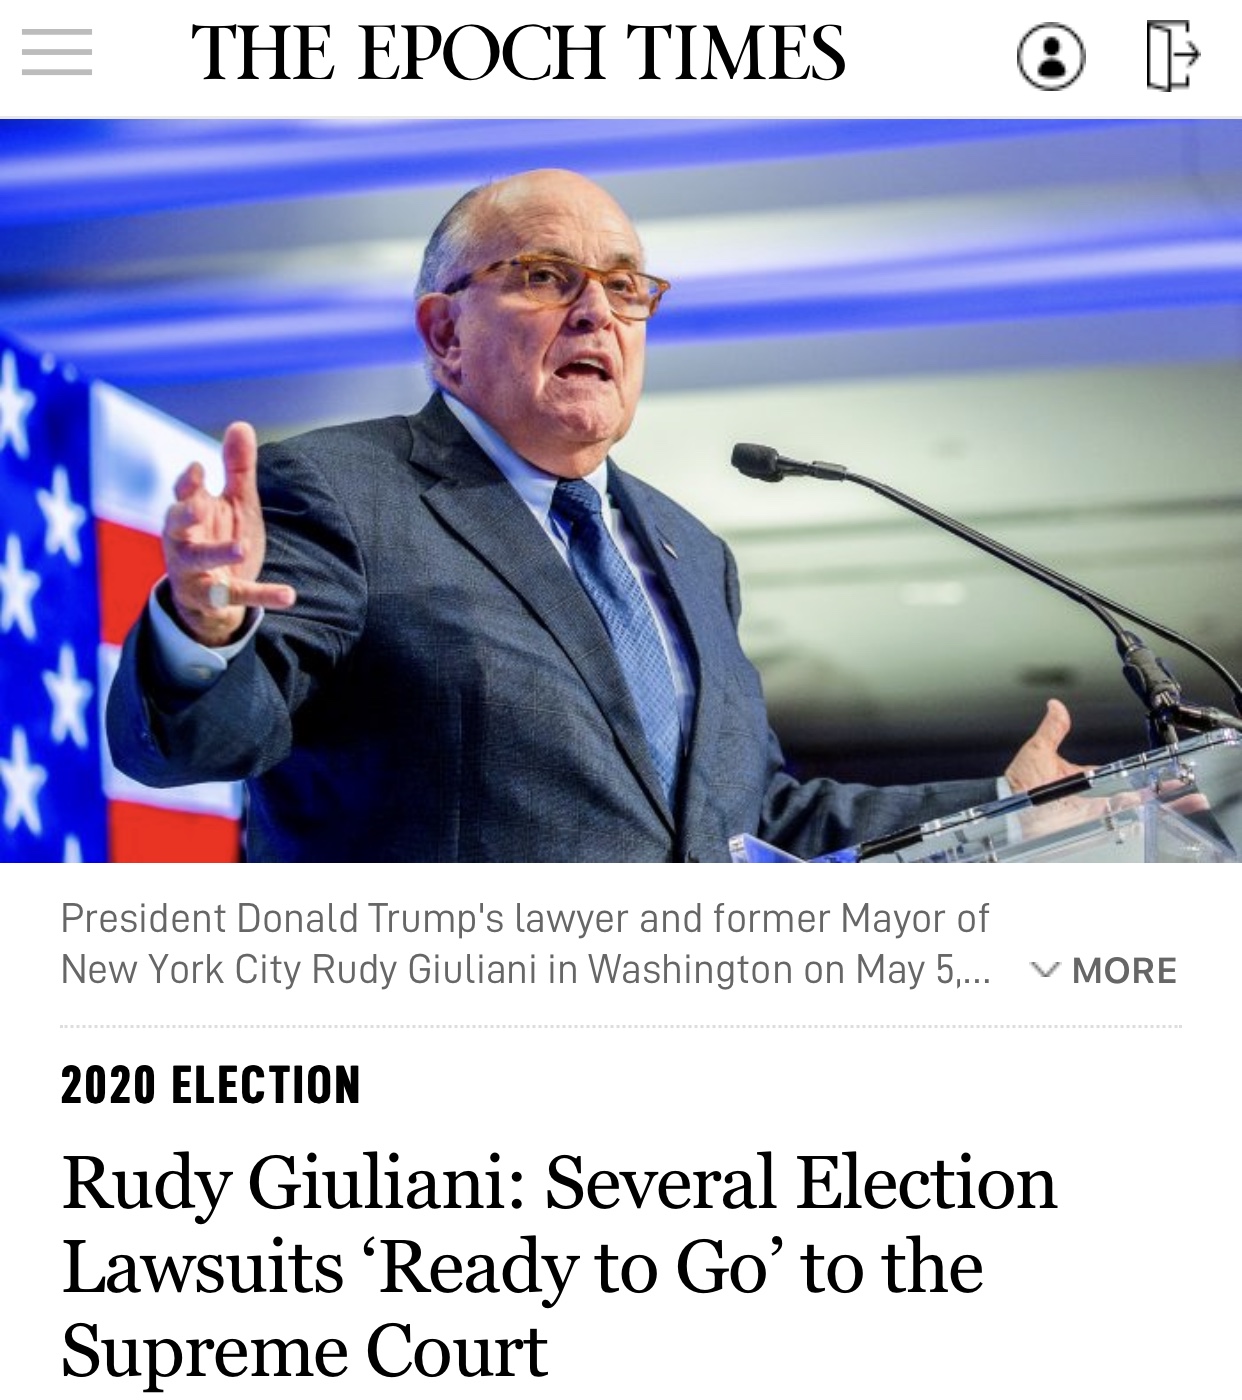 Rudy Giuliani: Several Election Lawsuits ‘Ready to Go’ to the Supreme Court